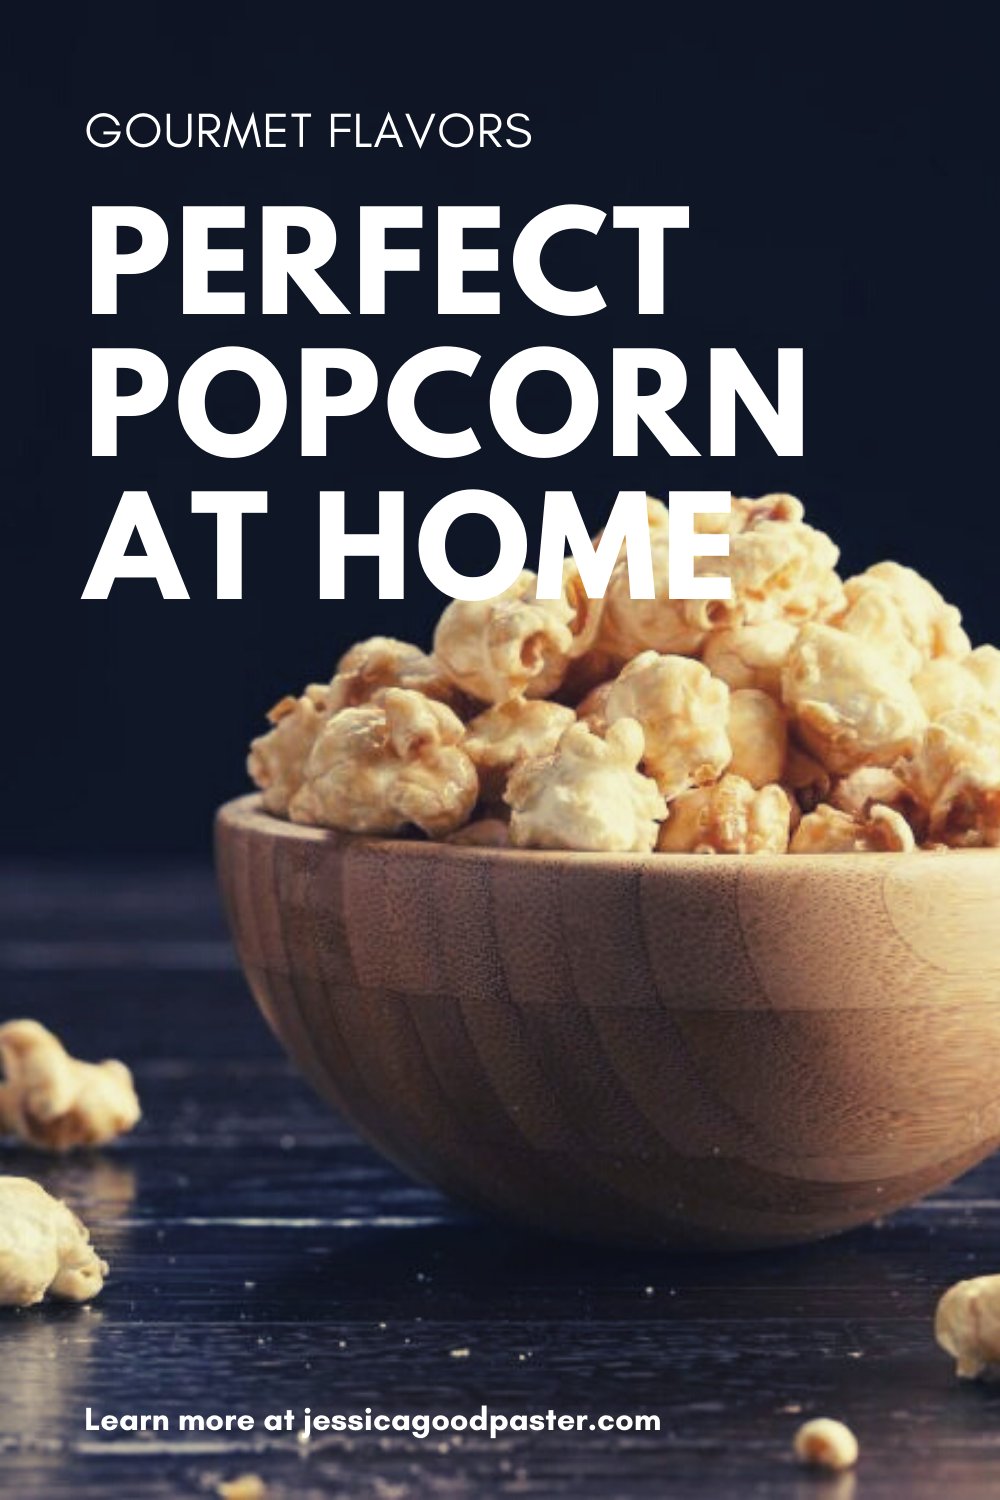 Perfect Popcorn at Home | Learn all about this handcrafted gourmet popcorn in my Gary Poppins review. Find unique sweet and savory flavors made from yummy recipes and seasonings that are freshly popped and sent to your home. Bags and tins of multiple sizes make great teacher gifts, corporate gifts, wedding favors, stocking stuffers, or a perfect movie theater night at home! Plus, get a coupon code for a discount. #popcorn #gourmetpopcorn #snackideas #stockingstuffer #weddingfavor #giftbasket #teachergifts #giftideas